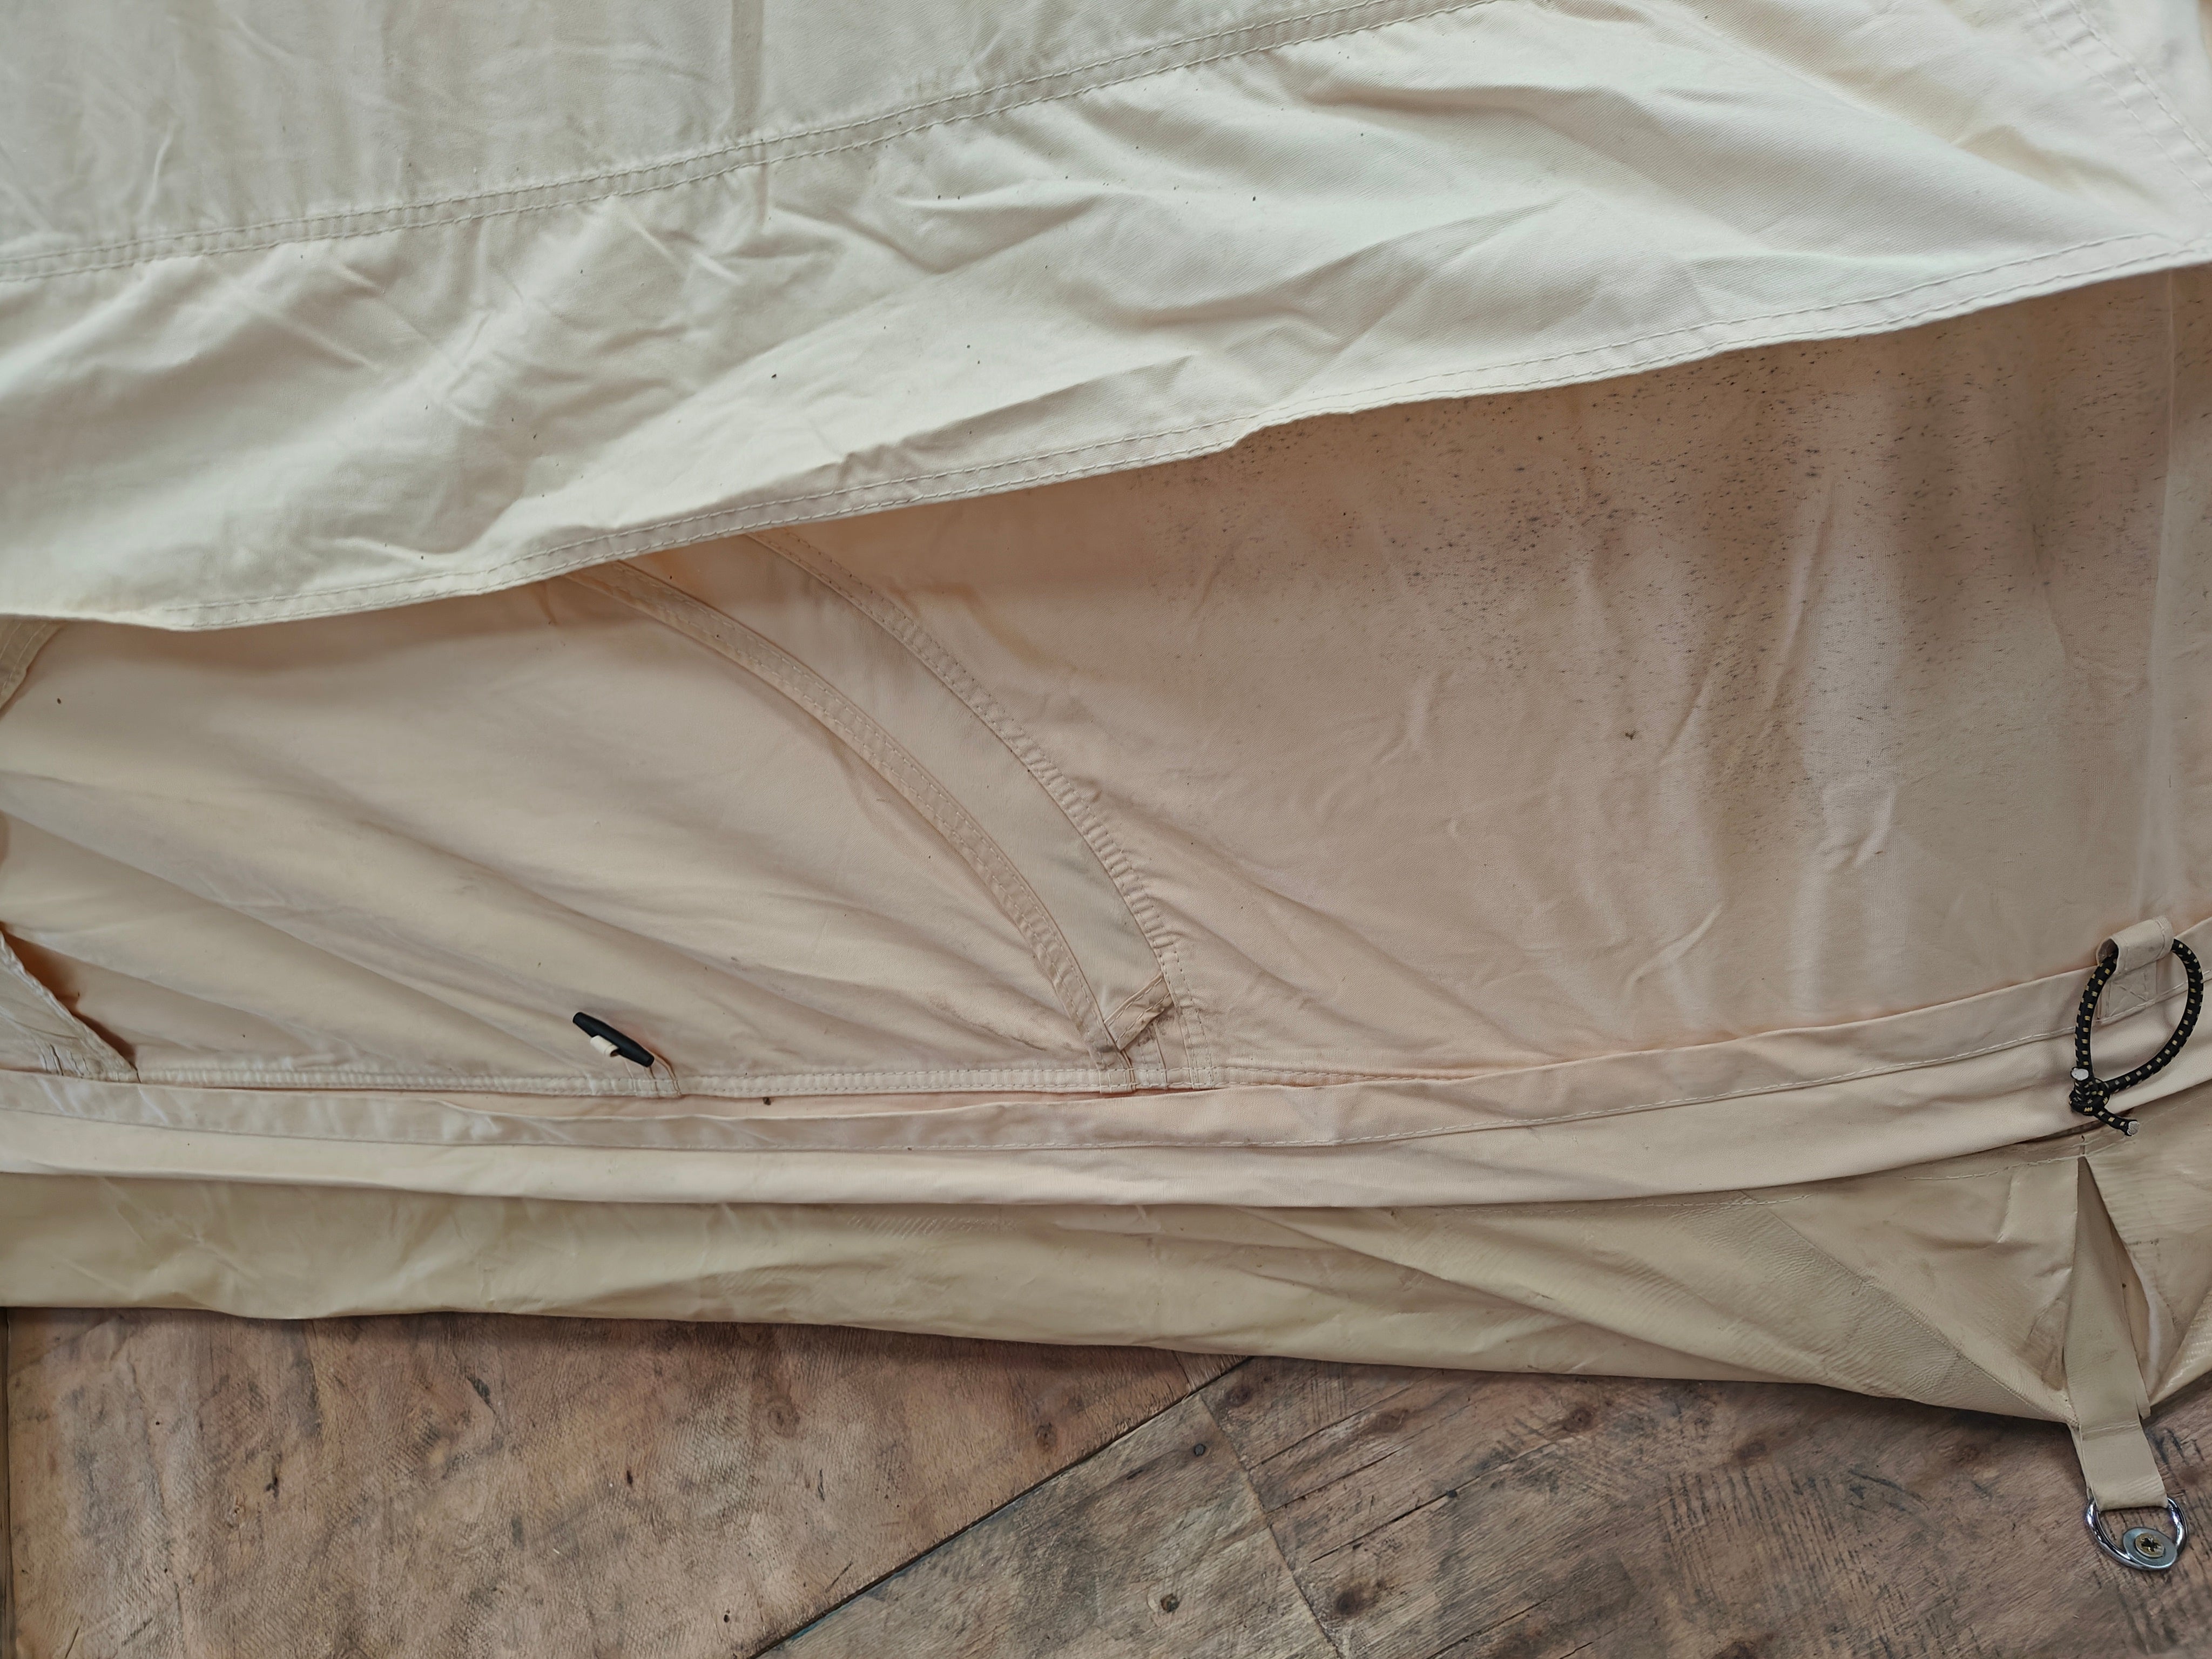 Used BTV 1 5m - Water Resistant Bell Tent with Stove Hole - Grade C (Patch Repair on Groundsheet) - 025